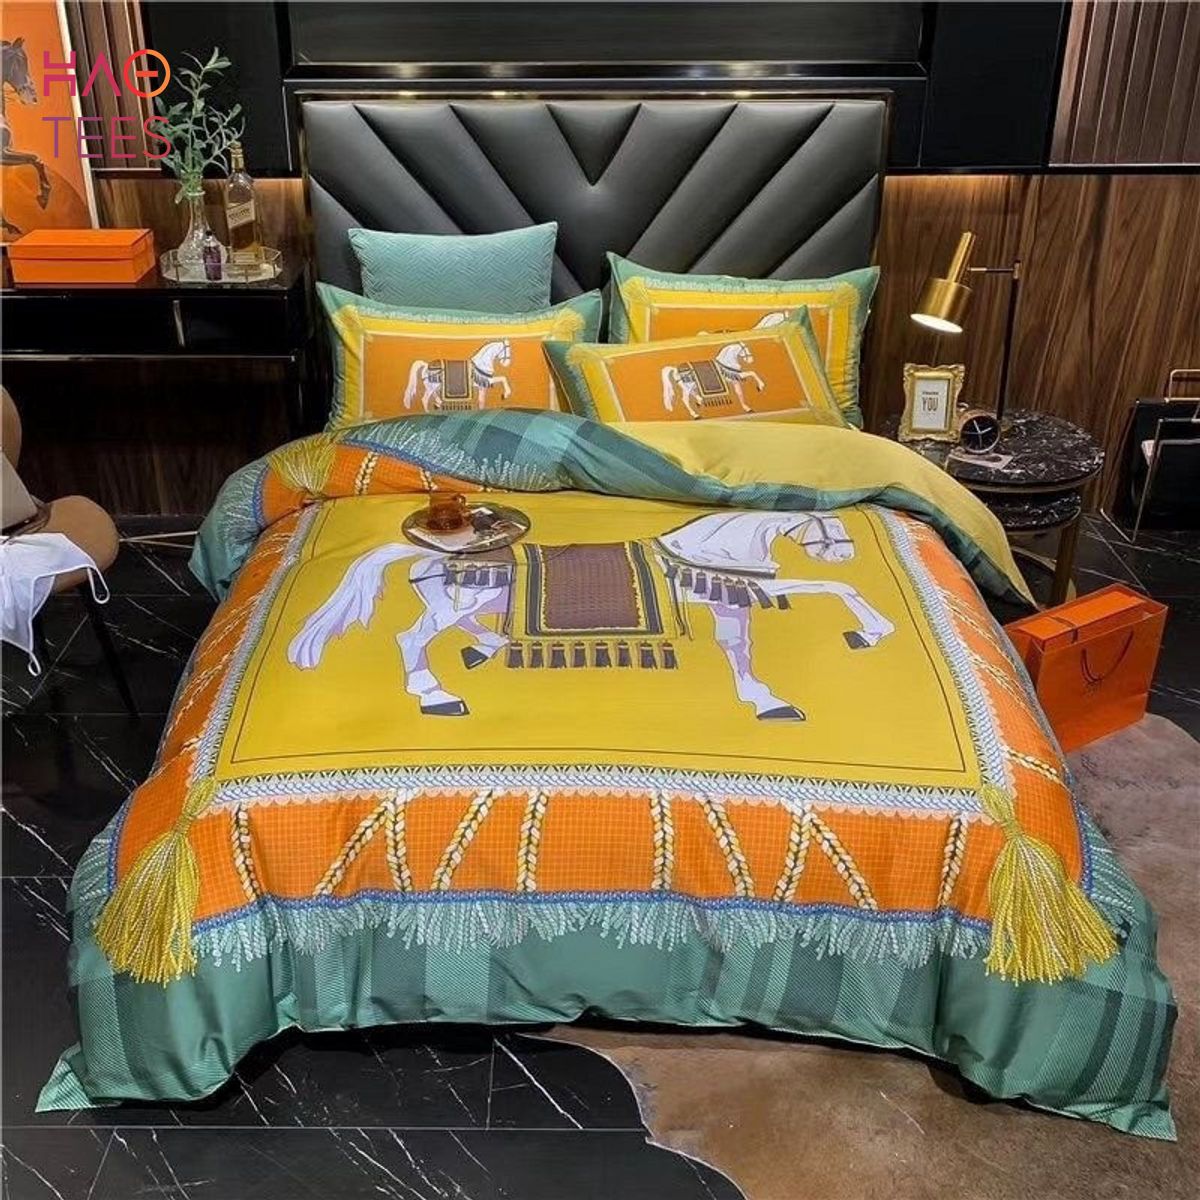 [THE BEST] Horse Mix Orange Luxury Color Bedding Sets All Over Printed